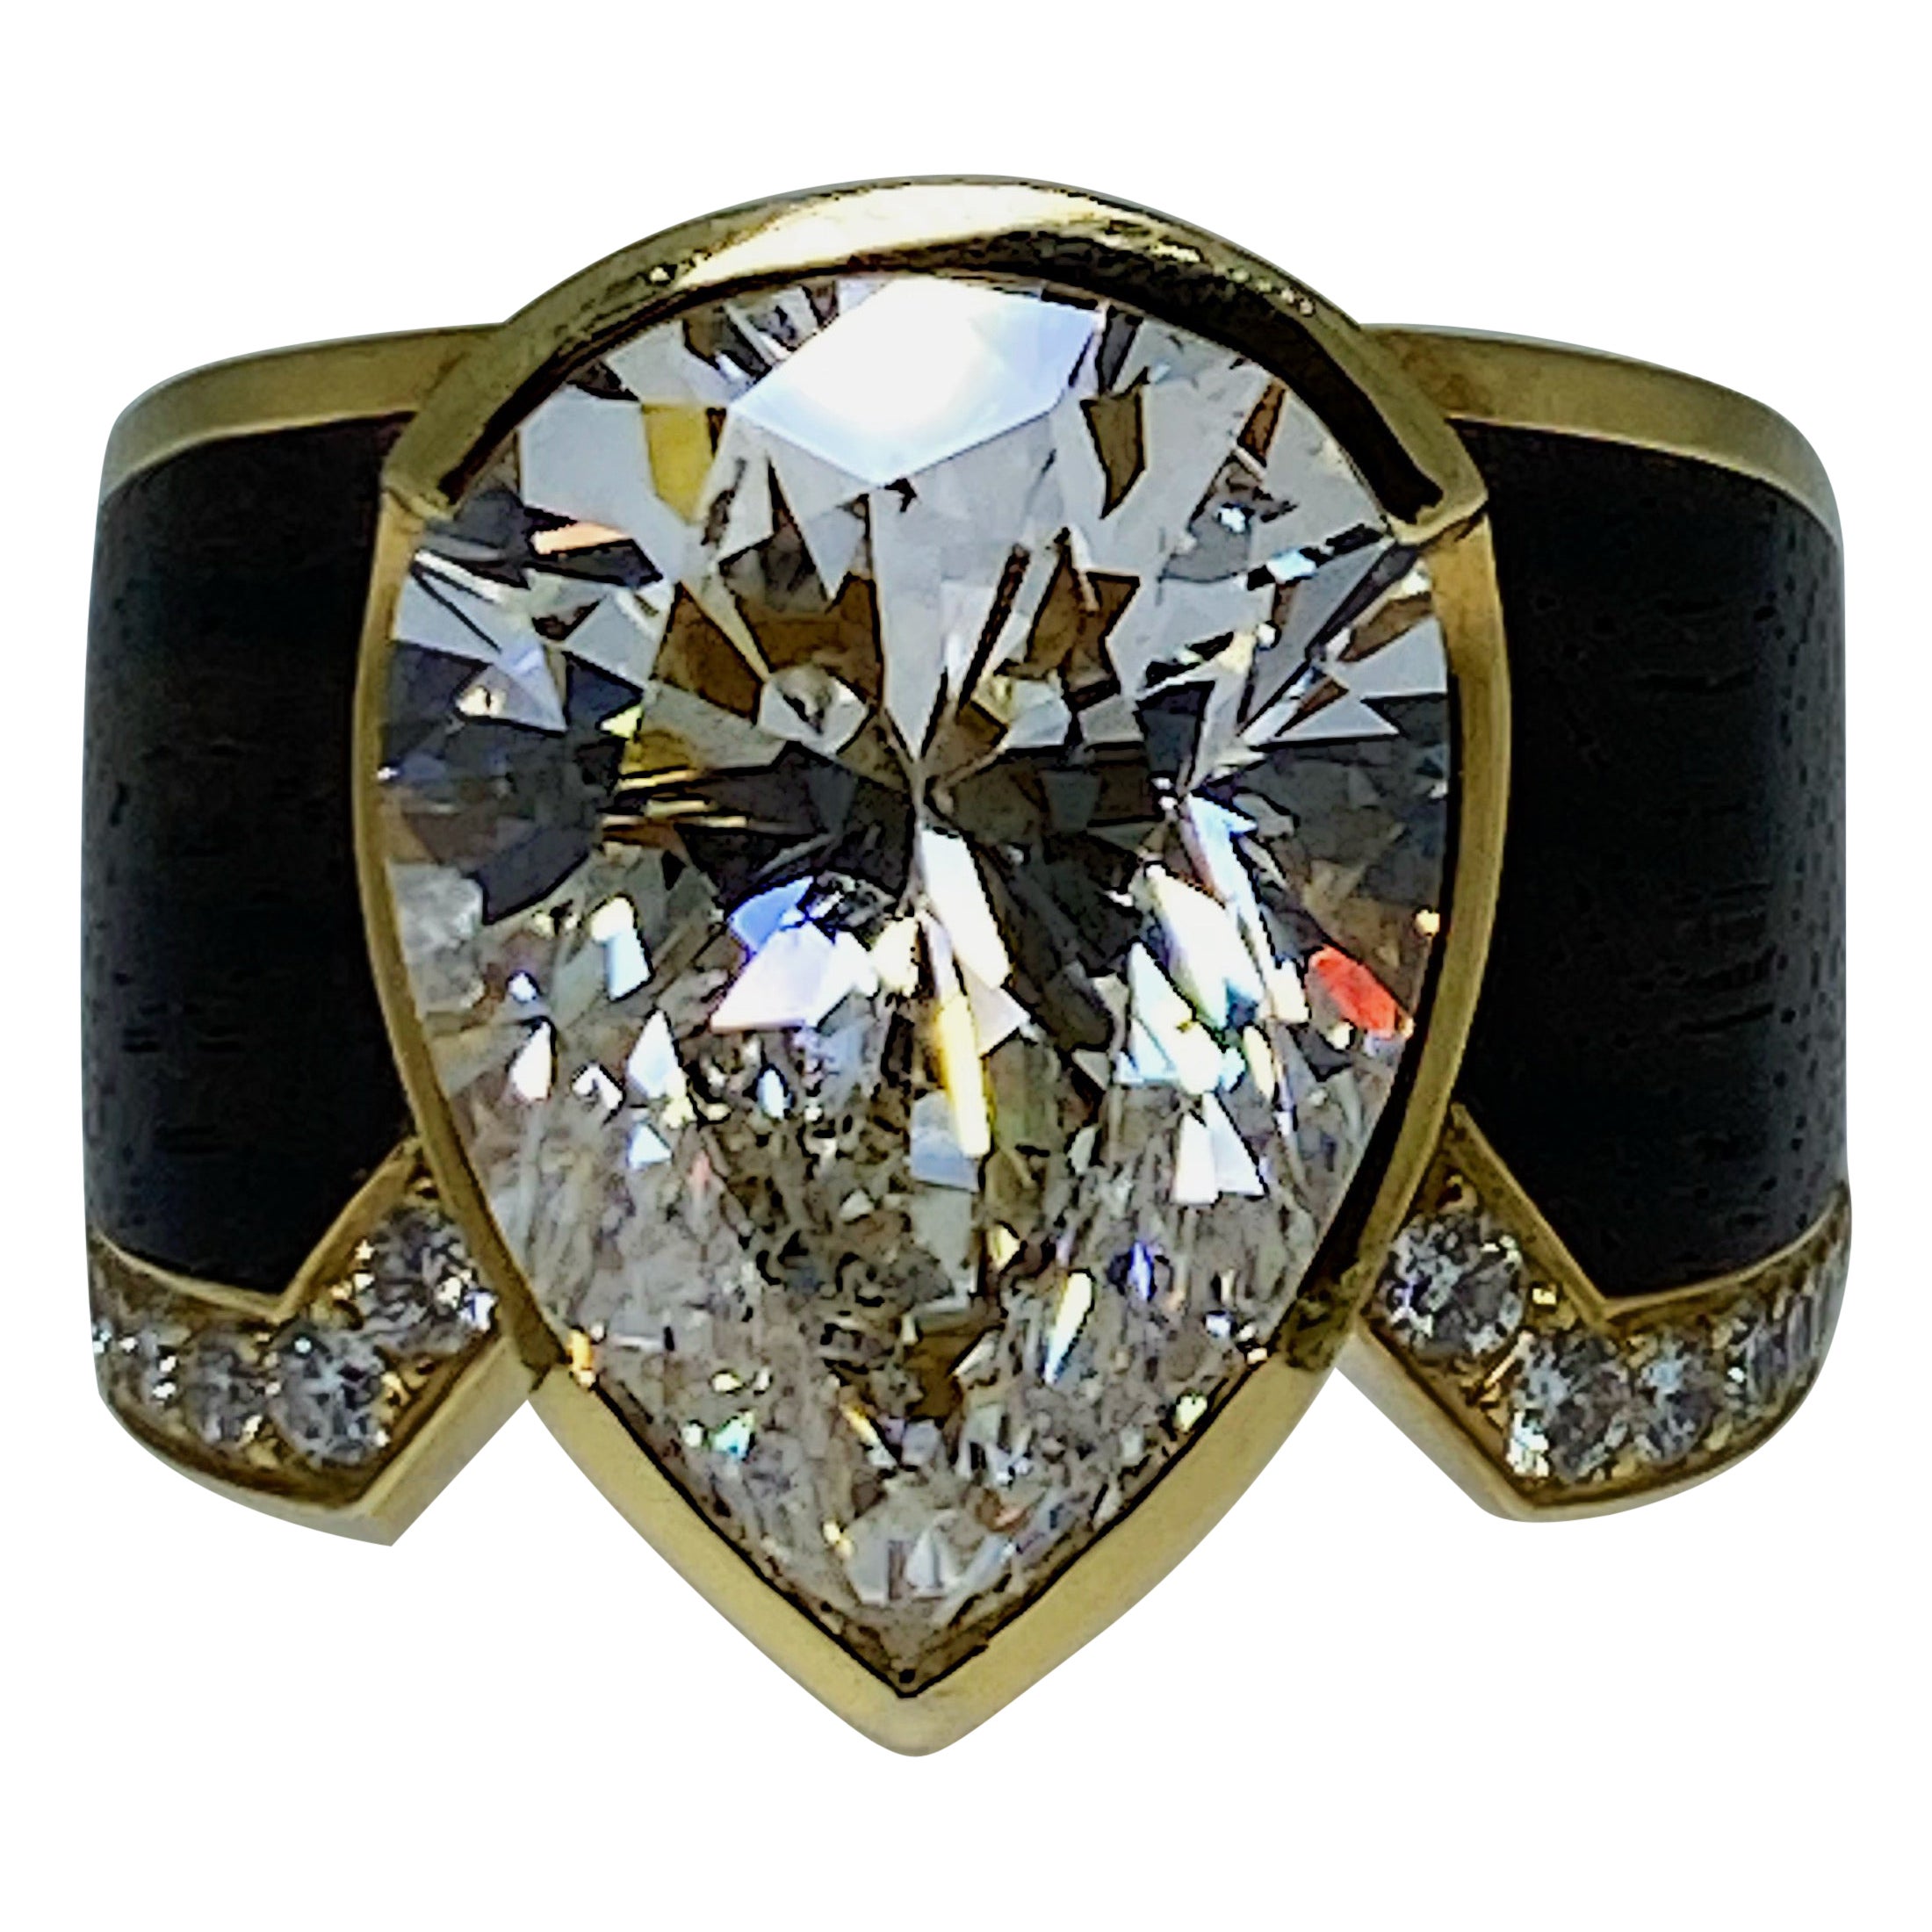 Natural 12.00ct Pear Shaped/Cut Diamond Ring in 18K Yellow Gold, valued at 490K